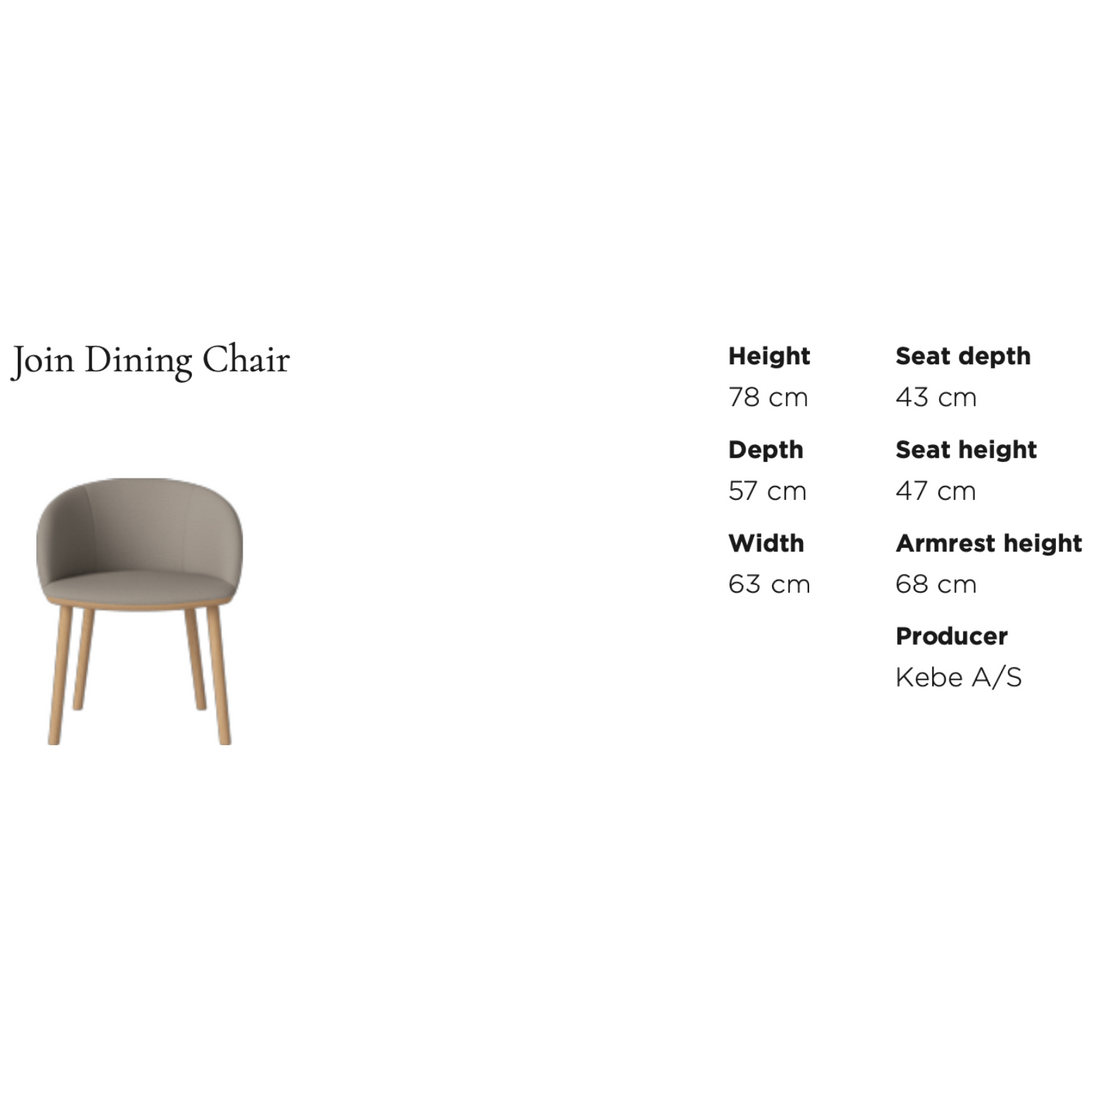 BOLIA Join Dining Chair Dimensions